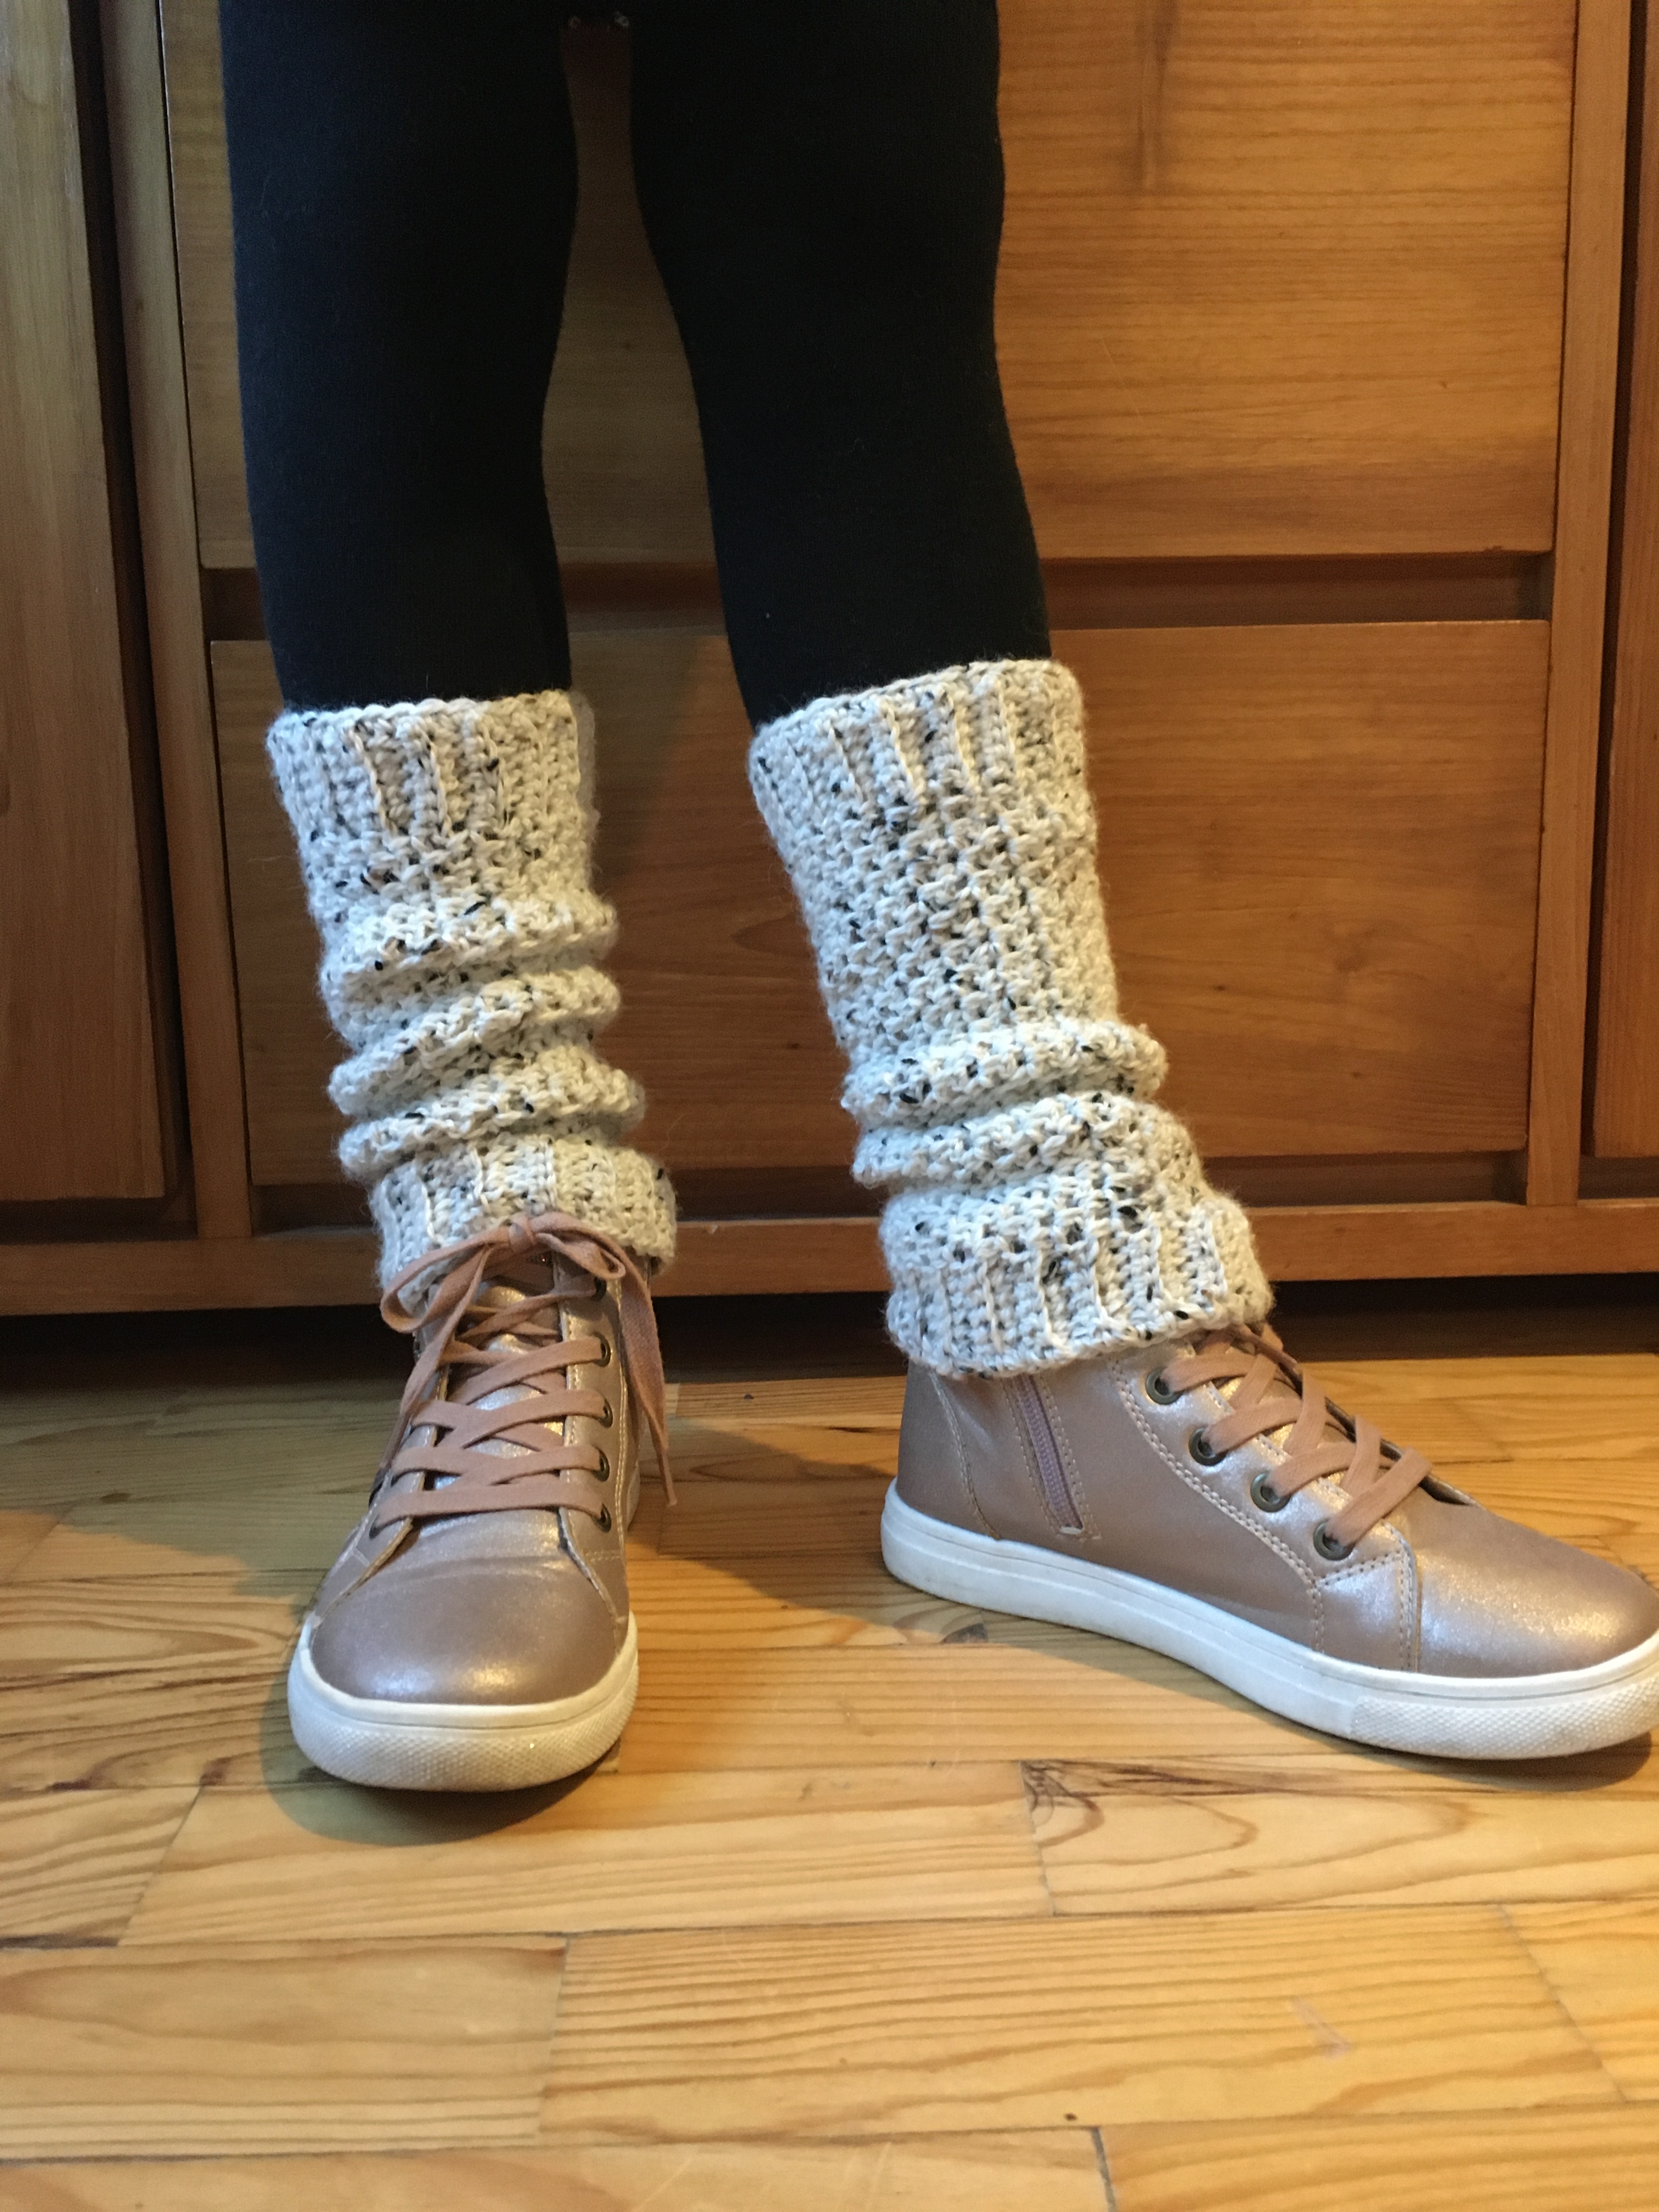 Stretchy crochet legwarmers, easy, side to side – Le coin paisible